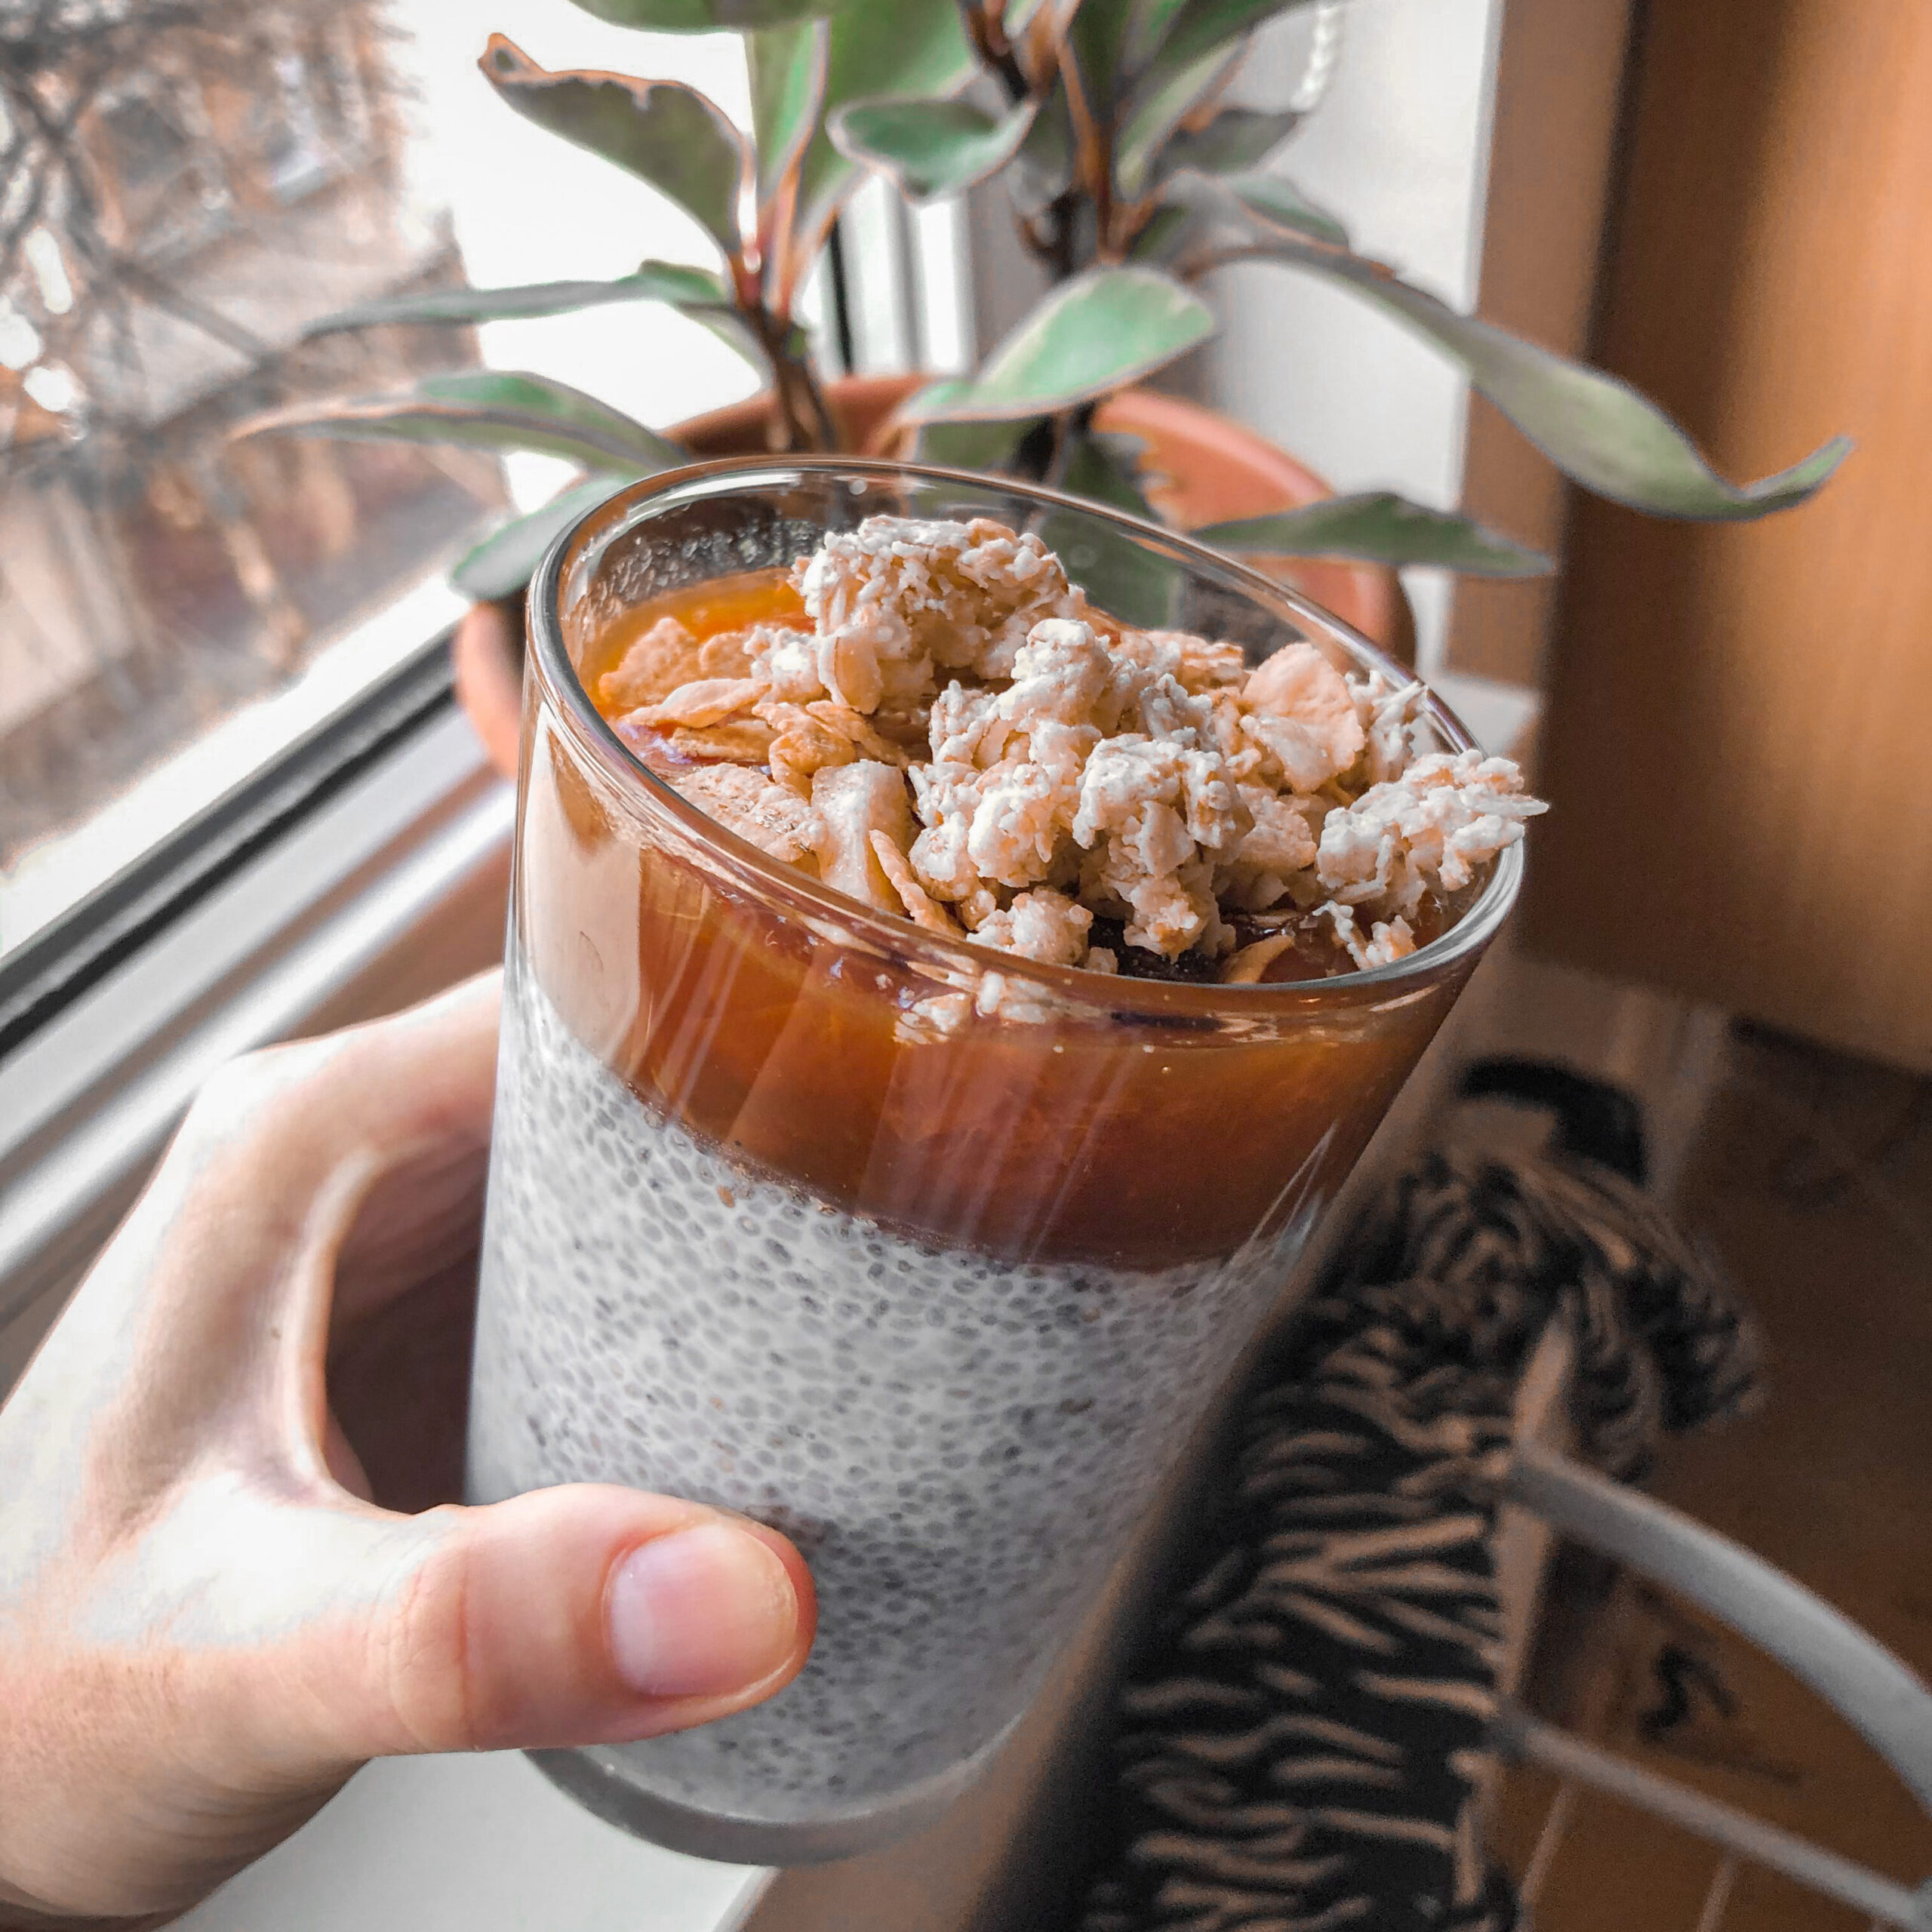 Chia pudding in the window